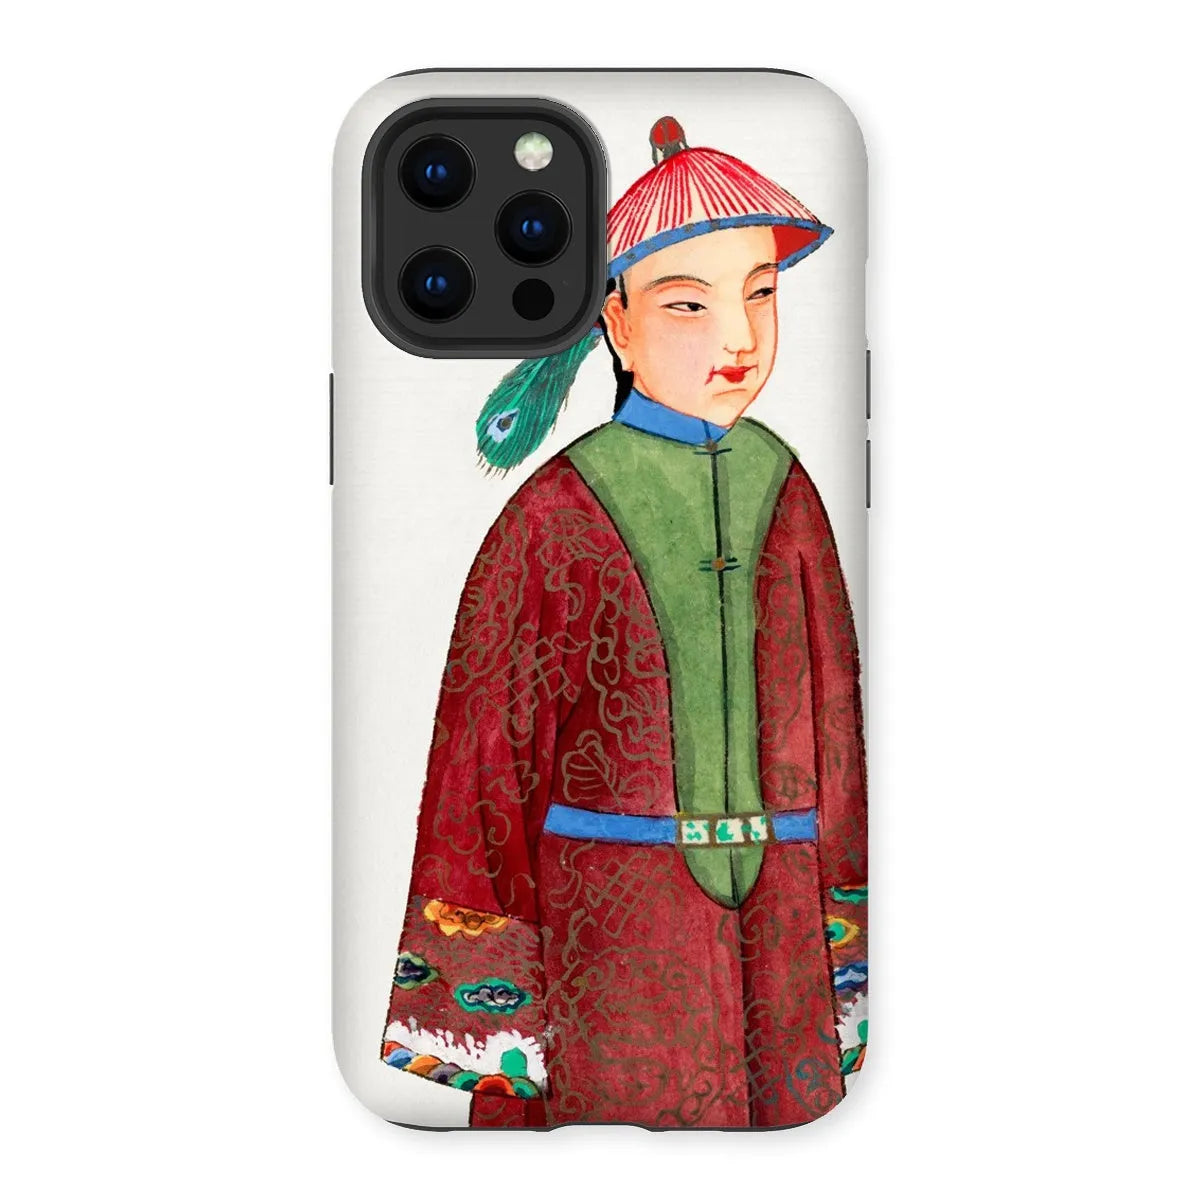 Manchu Dandy - Chinese Aesthetic Art Phone Case - Iphone 12 Pro Max / Matte - Mobile Phone Cases - Aesthetic Art